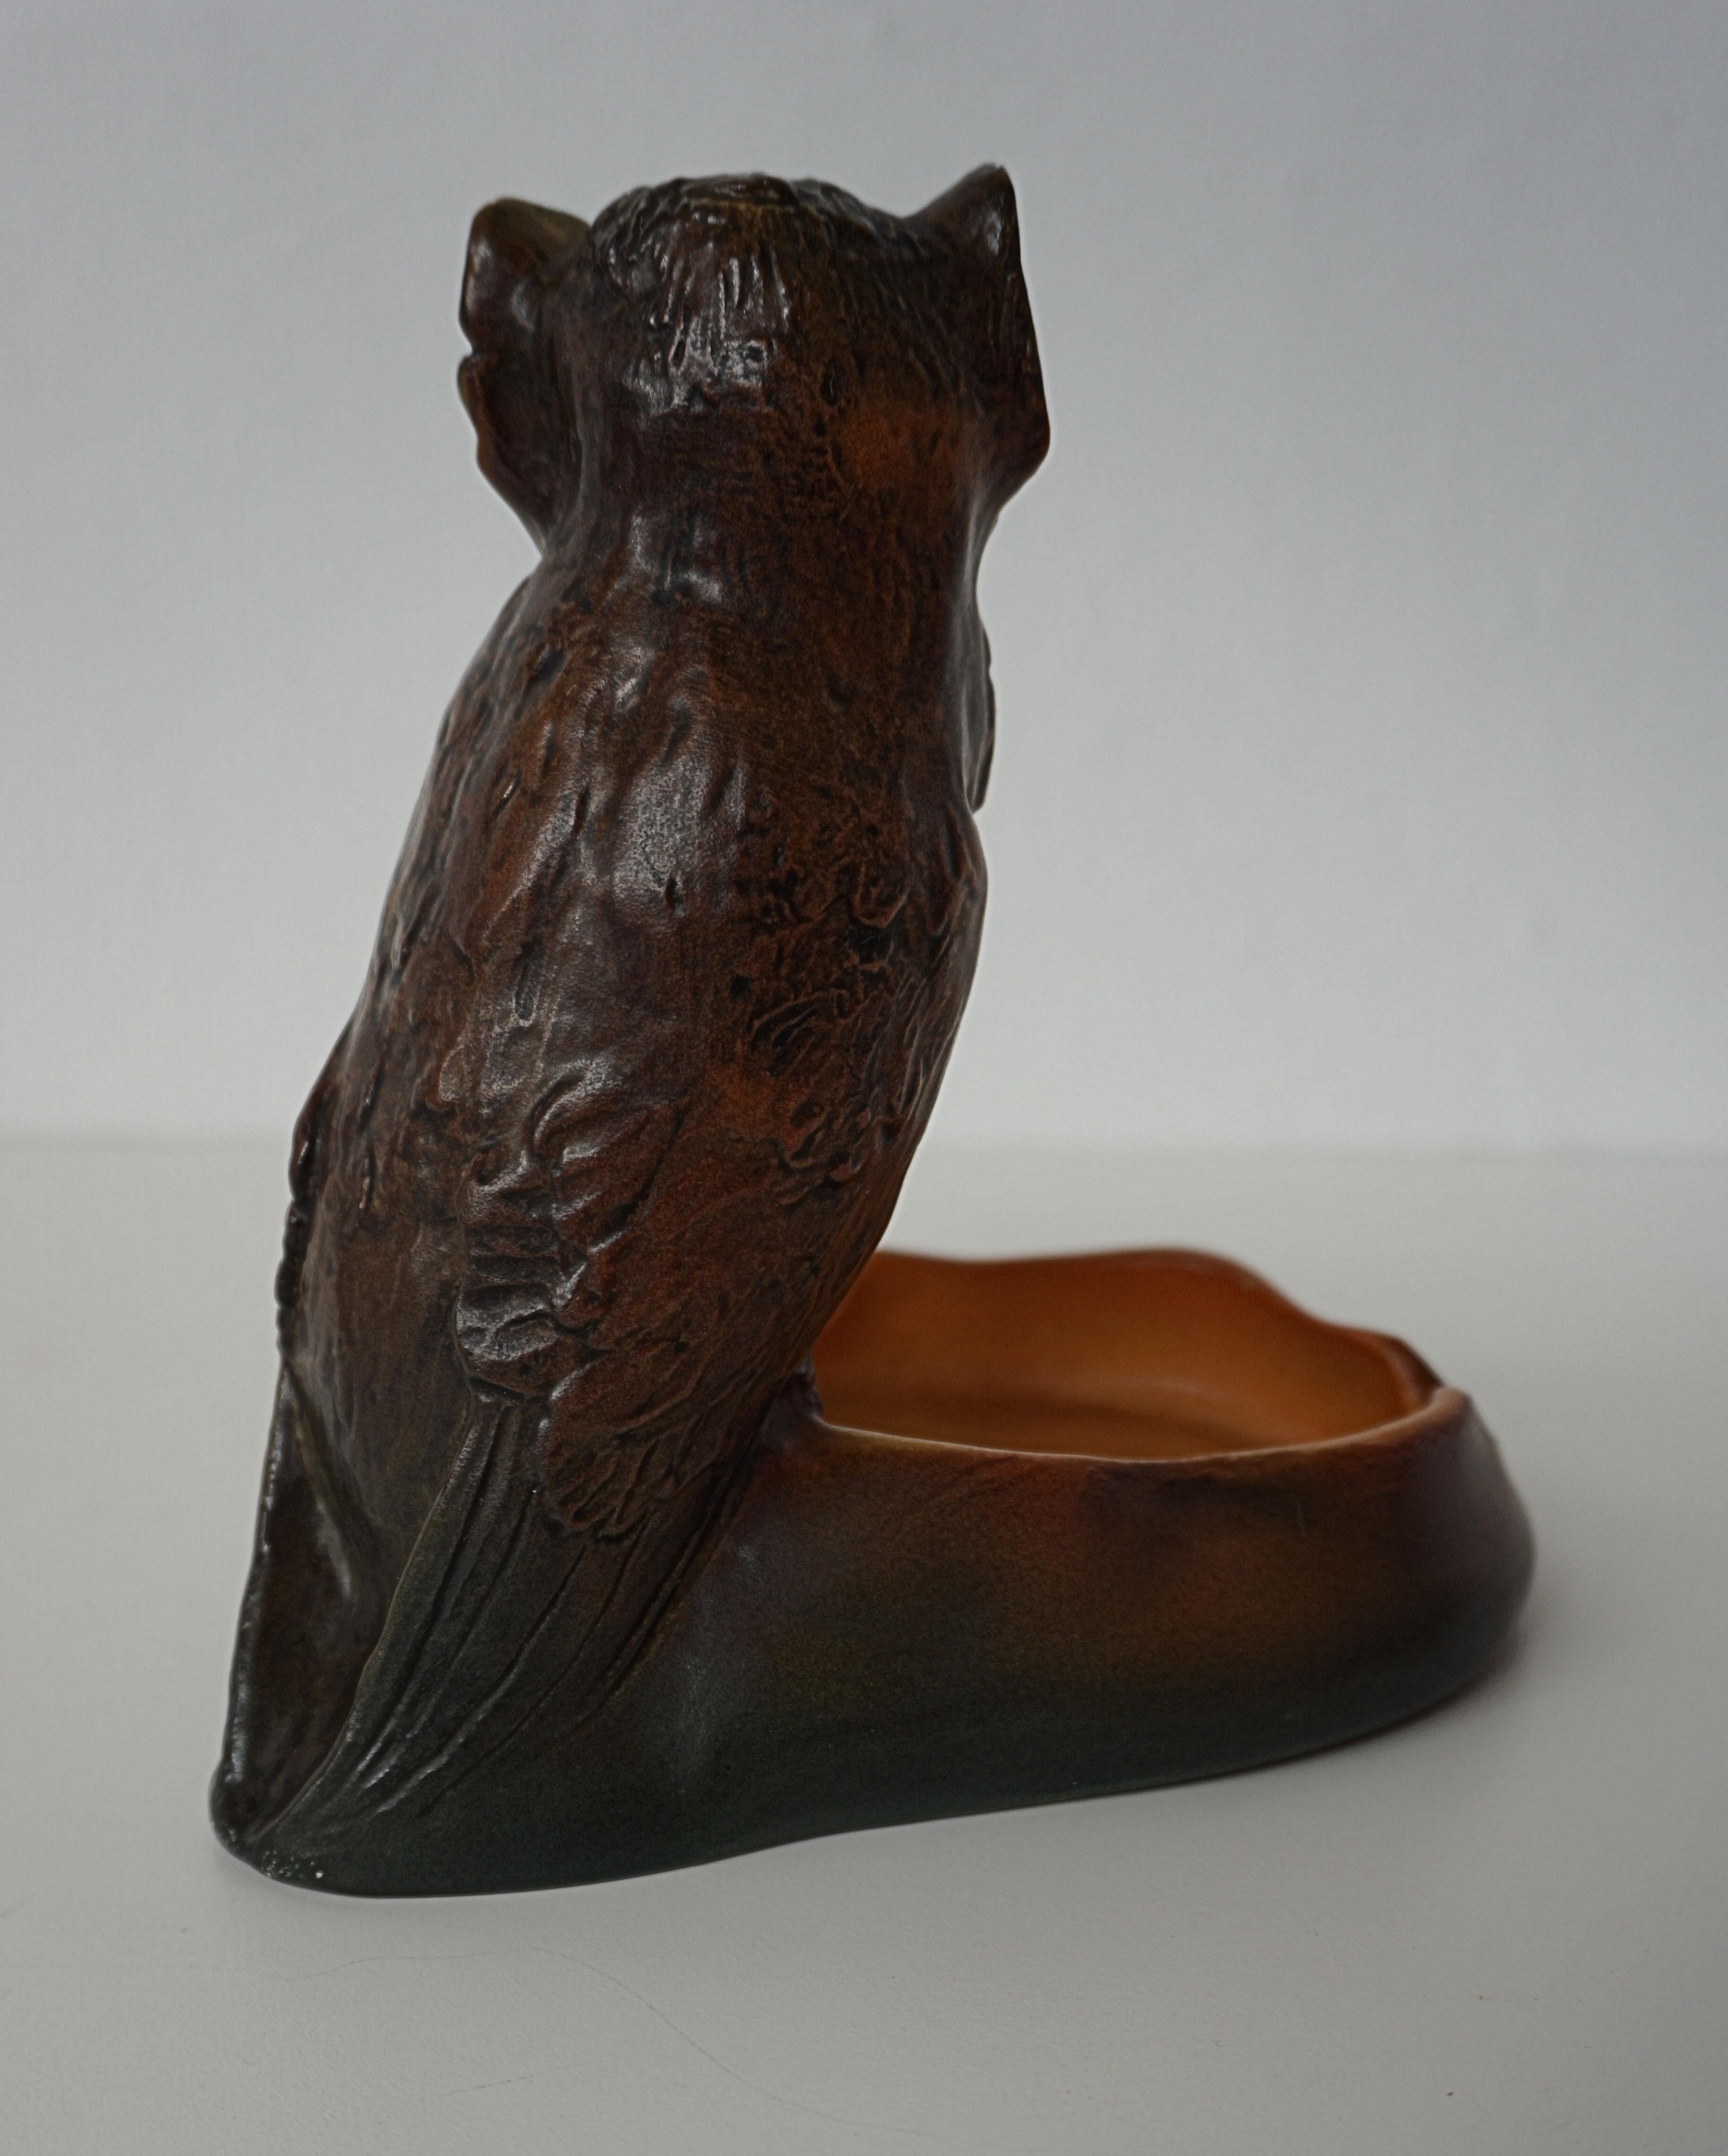 Hand-Crafted 1915 Handcrafted Danish Art Nouveau Owl Bowl by Niels Norvill for Ipsens Enke